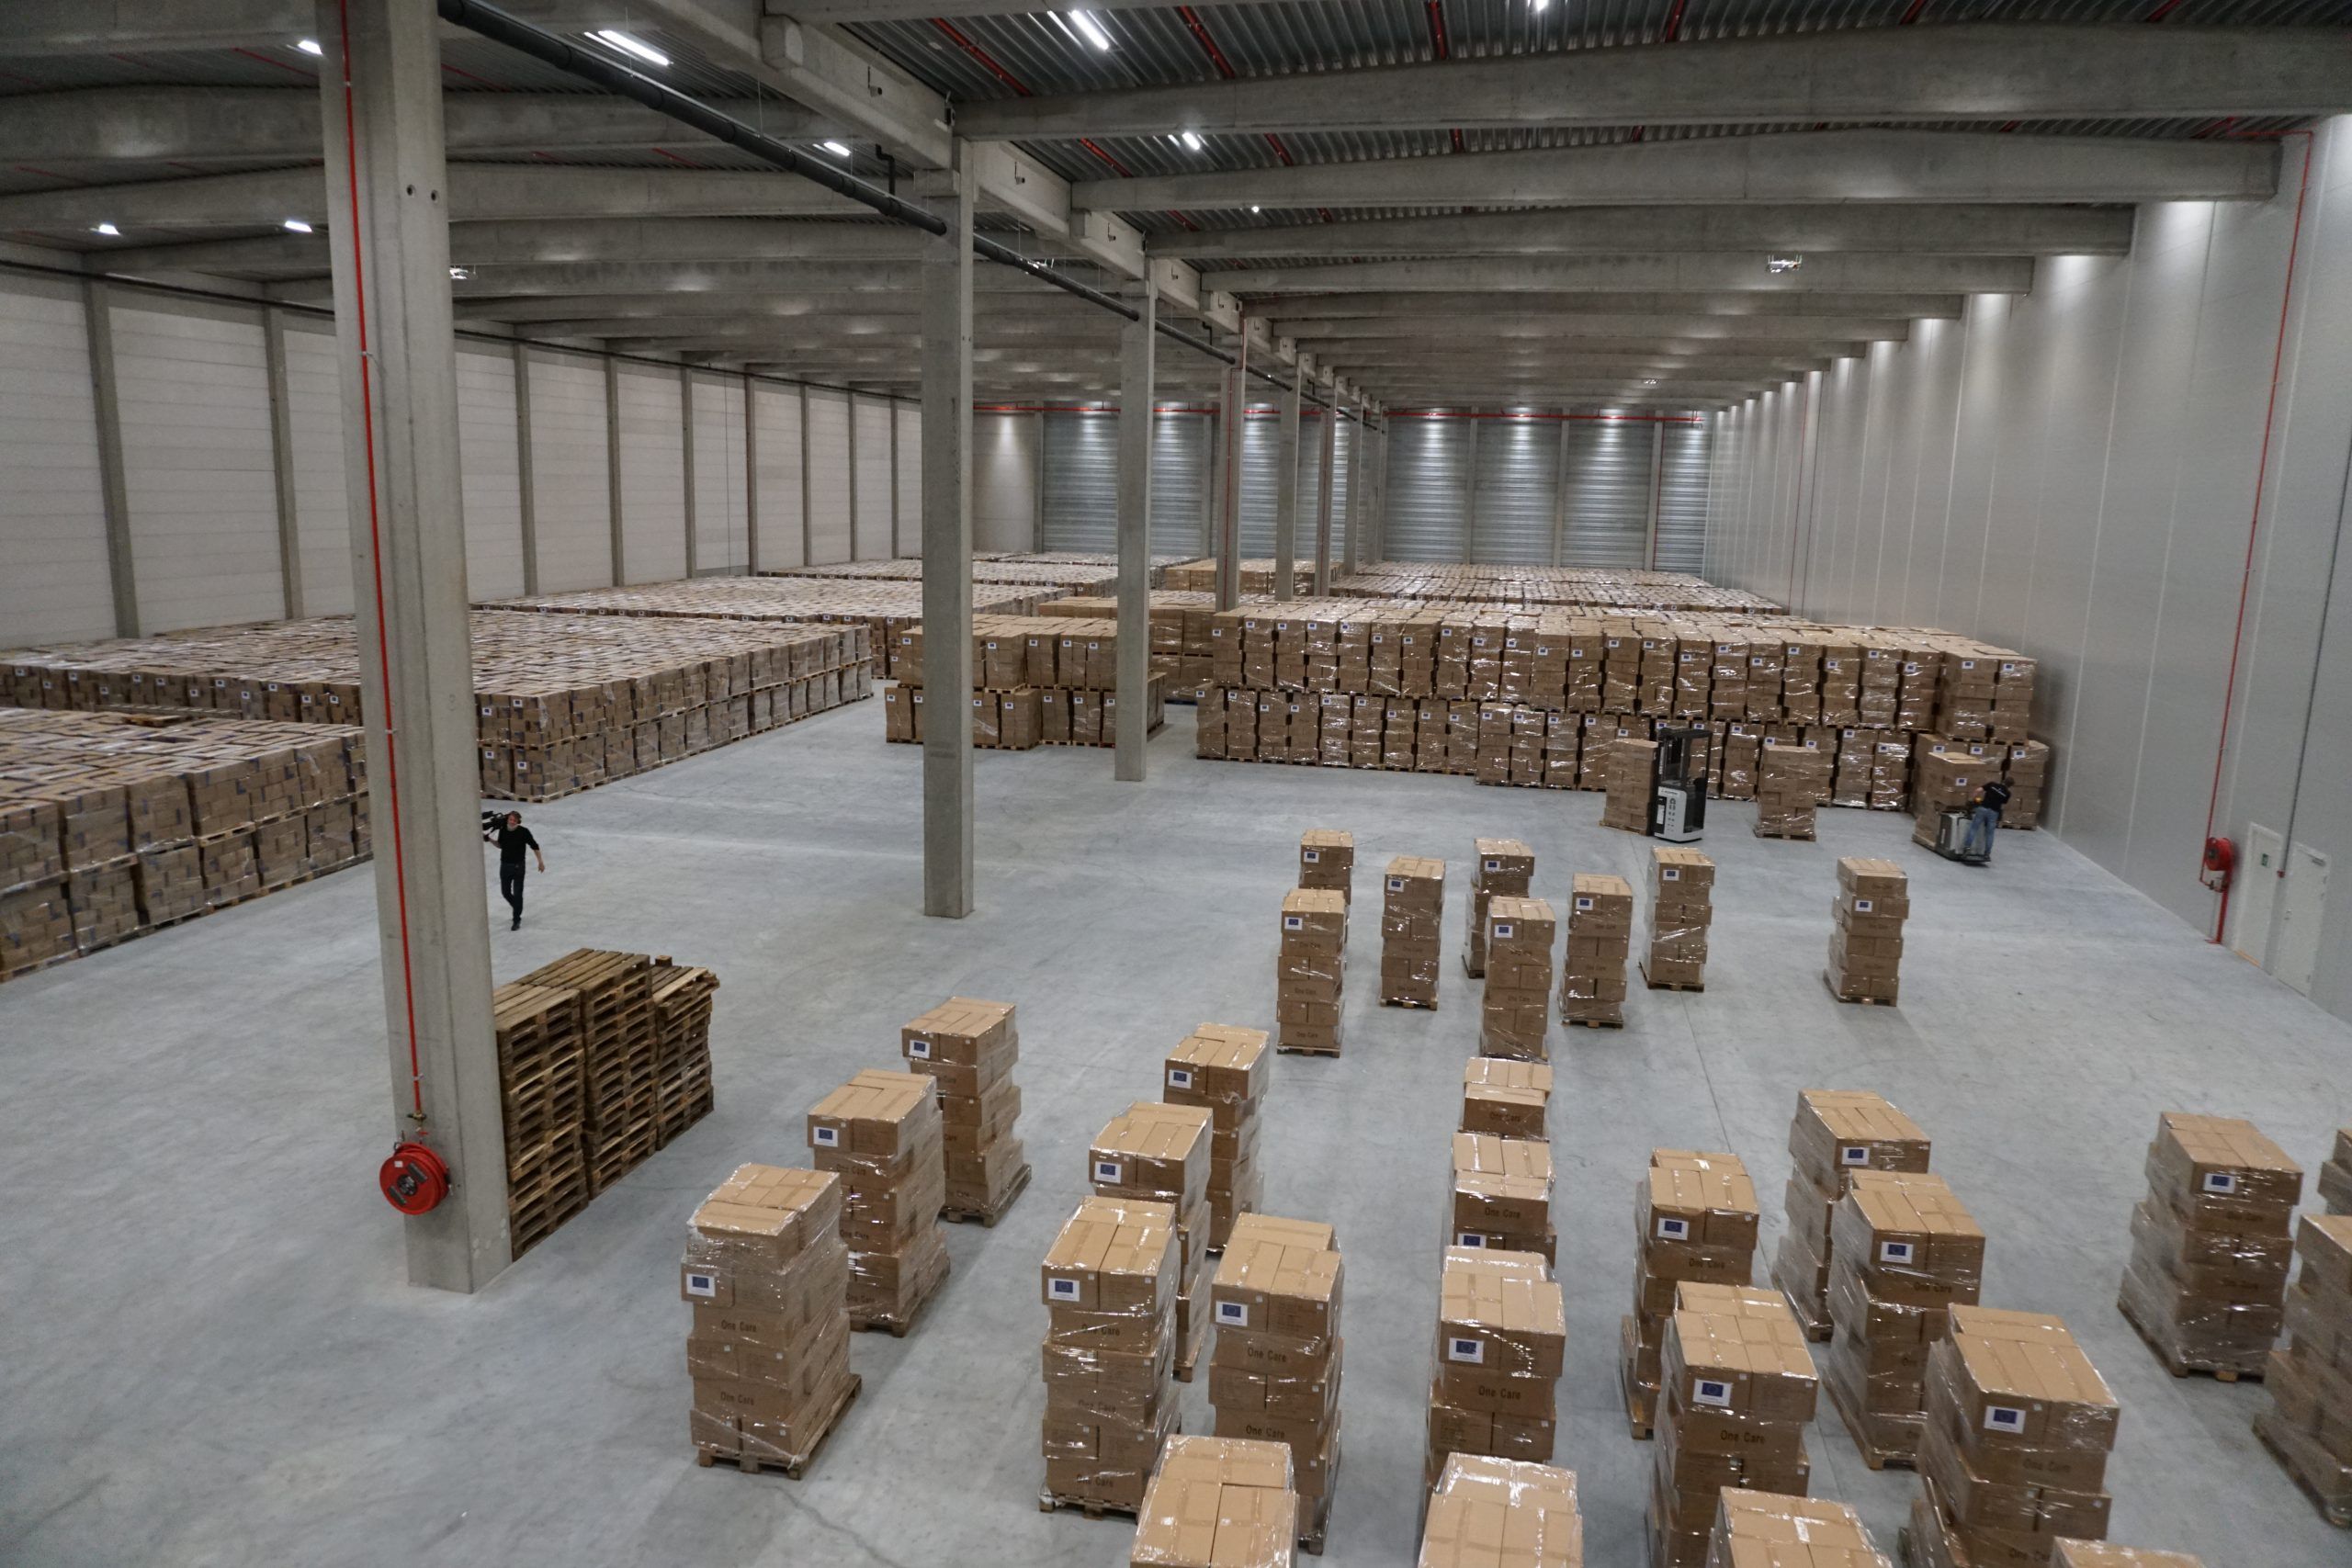 EU’s first protective equipment storage facility ready in Denmark